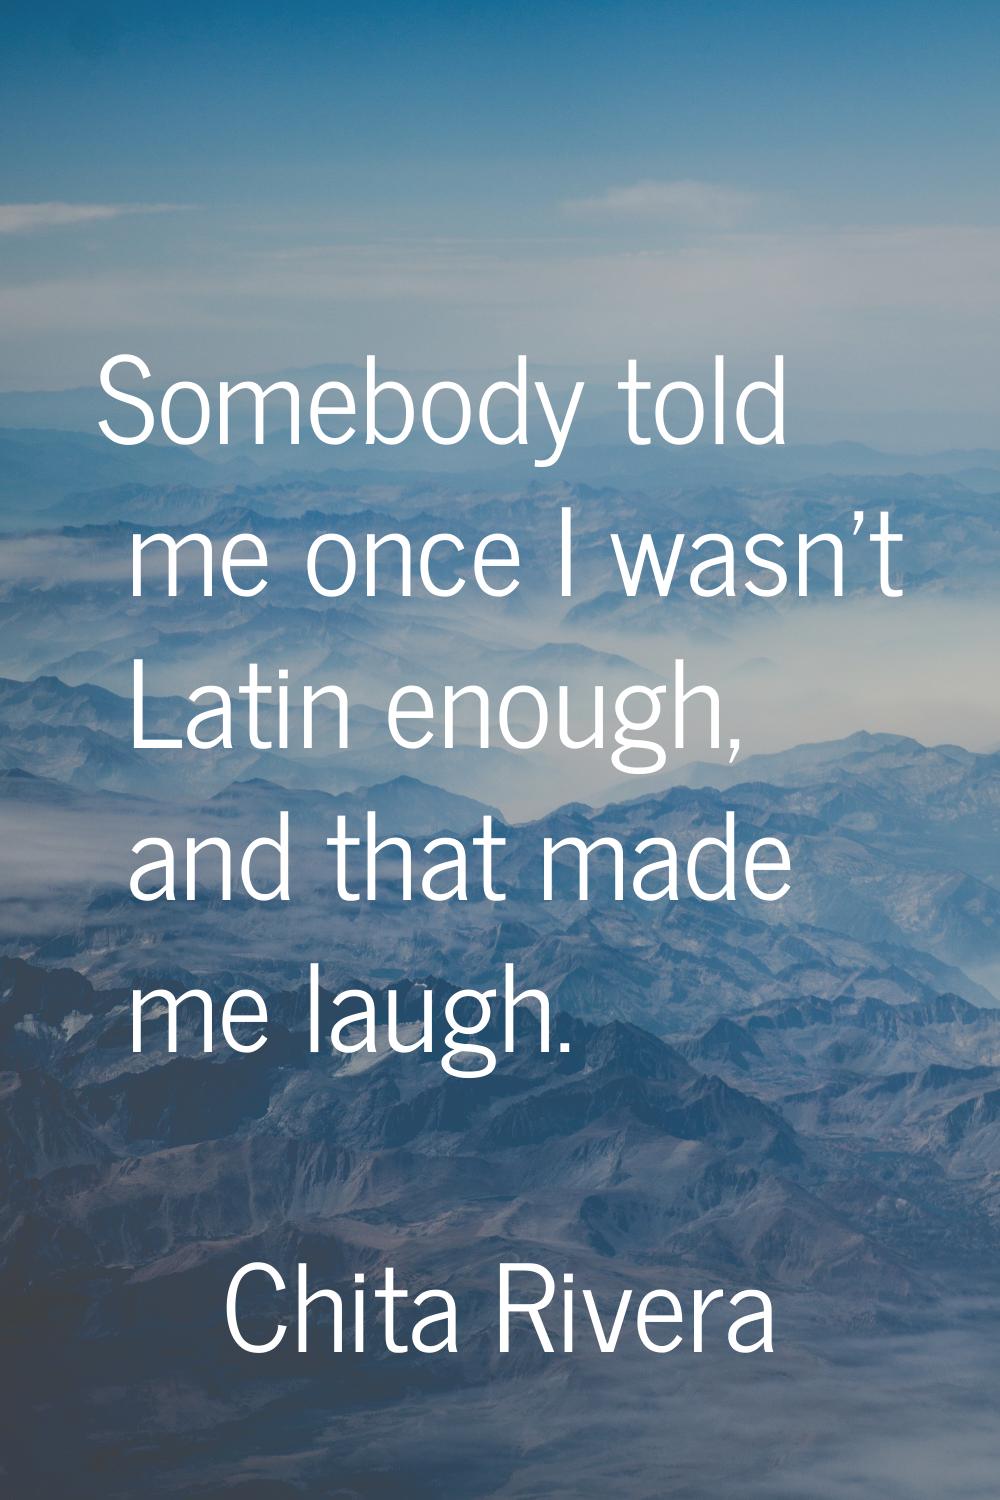 Somebody told me once I wasn't Latin enough, and that made me laugh.